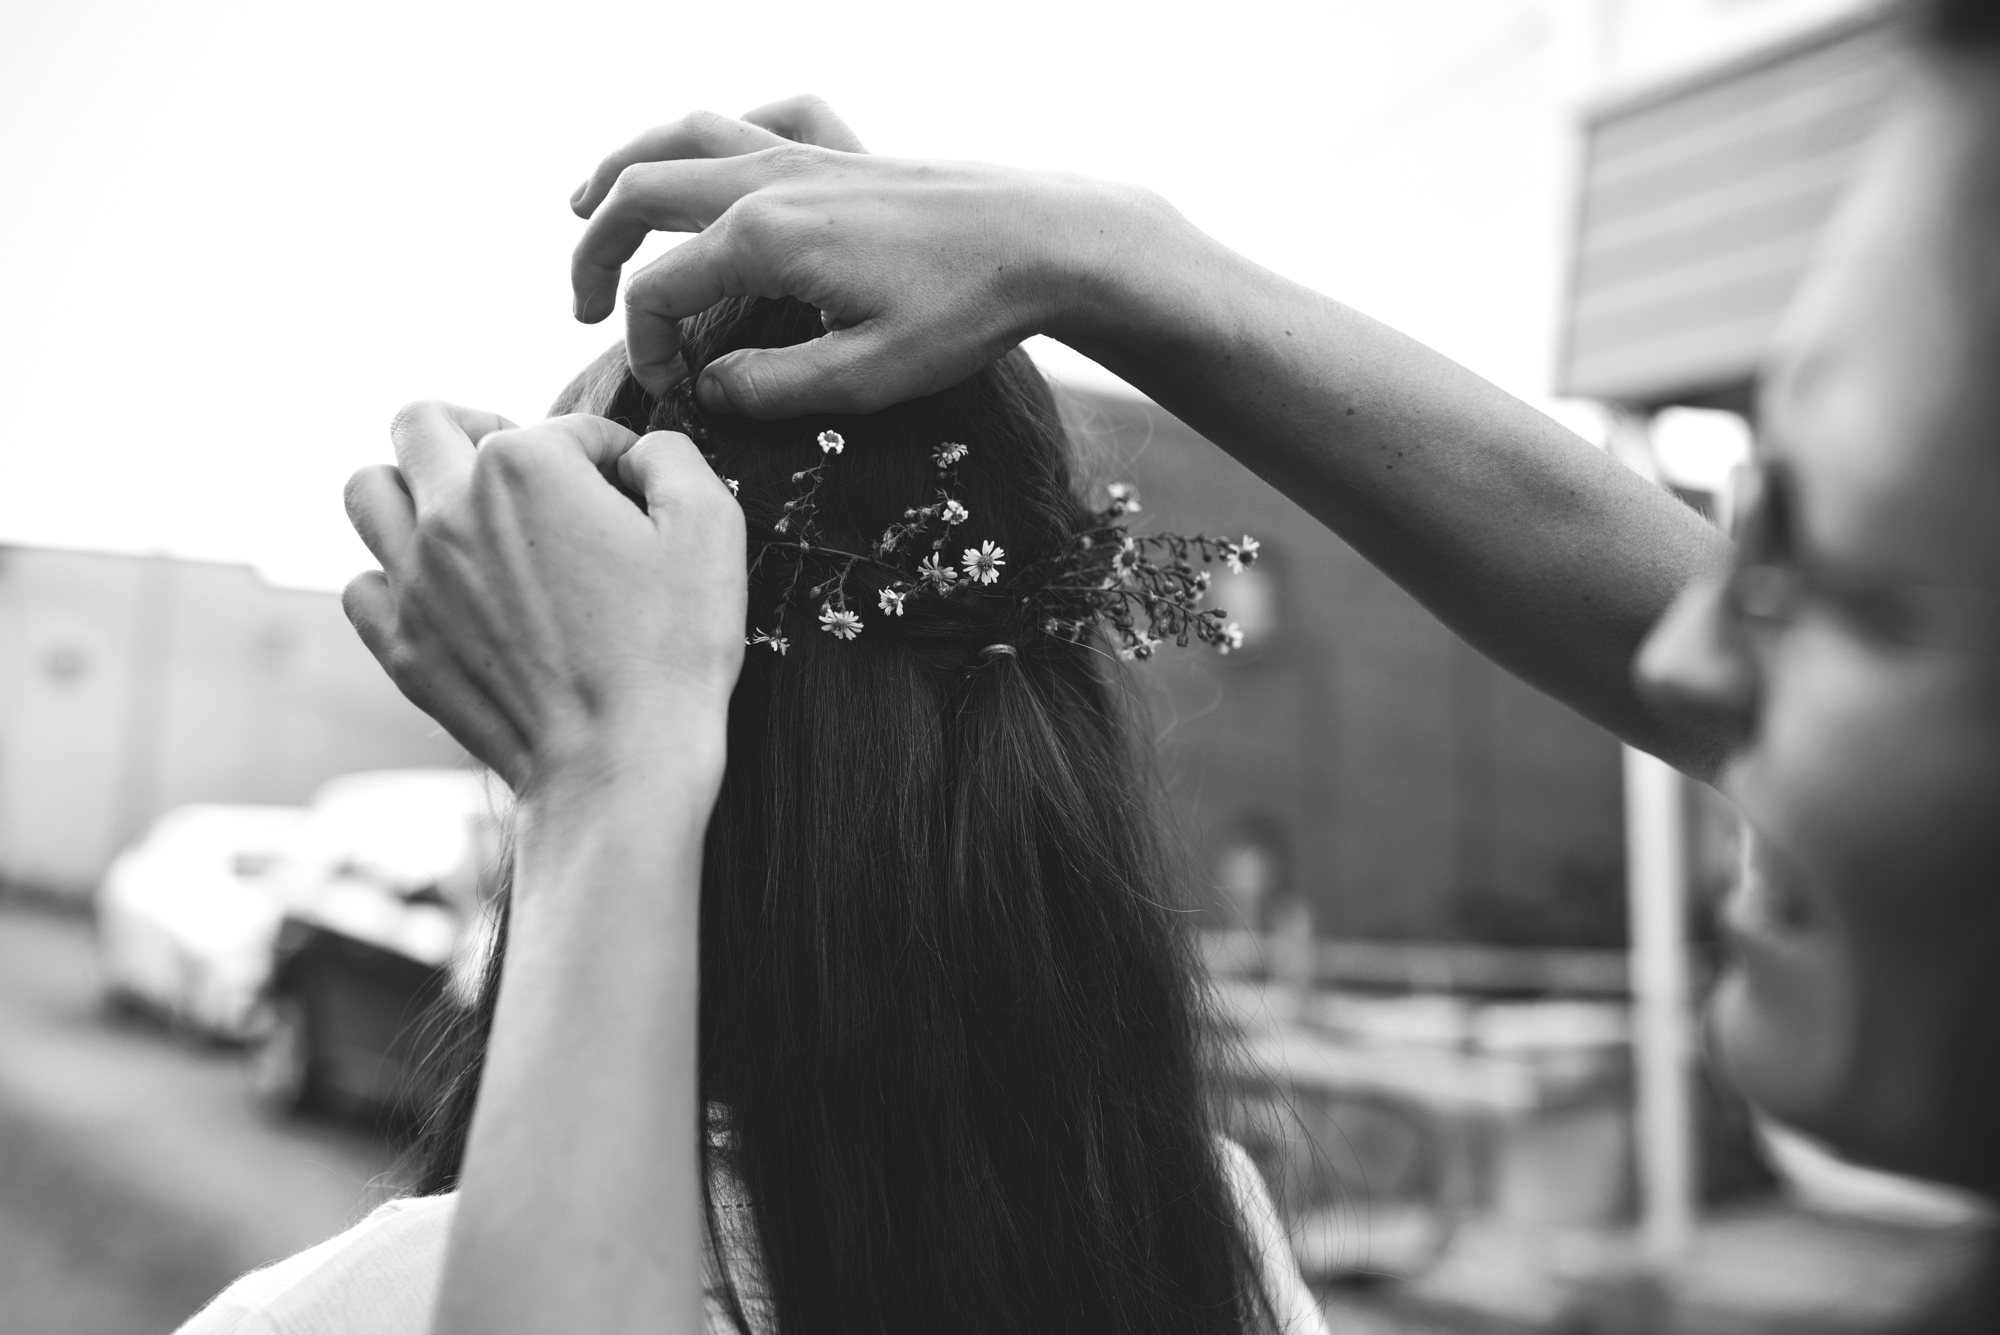  Mountains, Outdoors, Rustic, West Virginia, Maryland Wedding Photographer, DIY, Casual, Black and White Photo, Baby’s Breath in Hair, Bride getting ready 